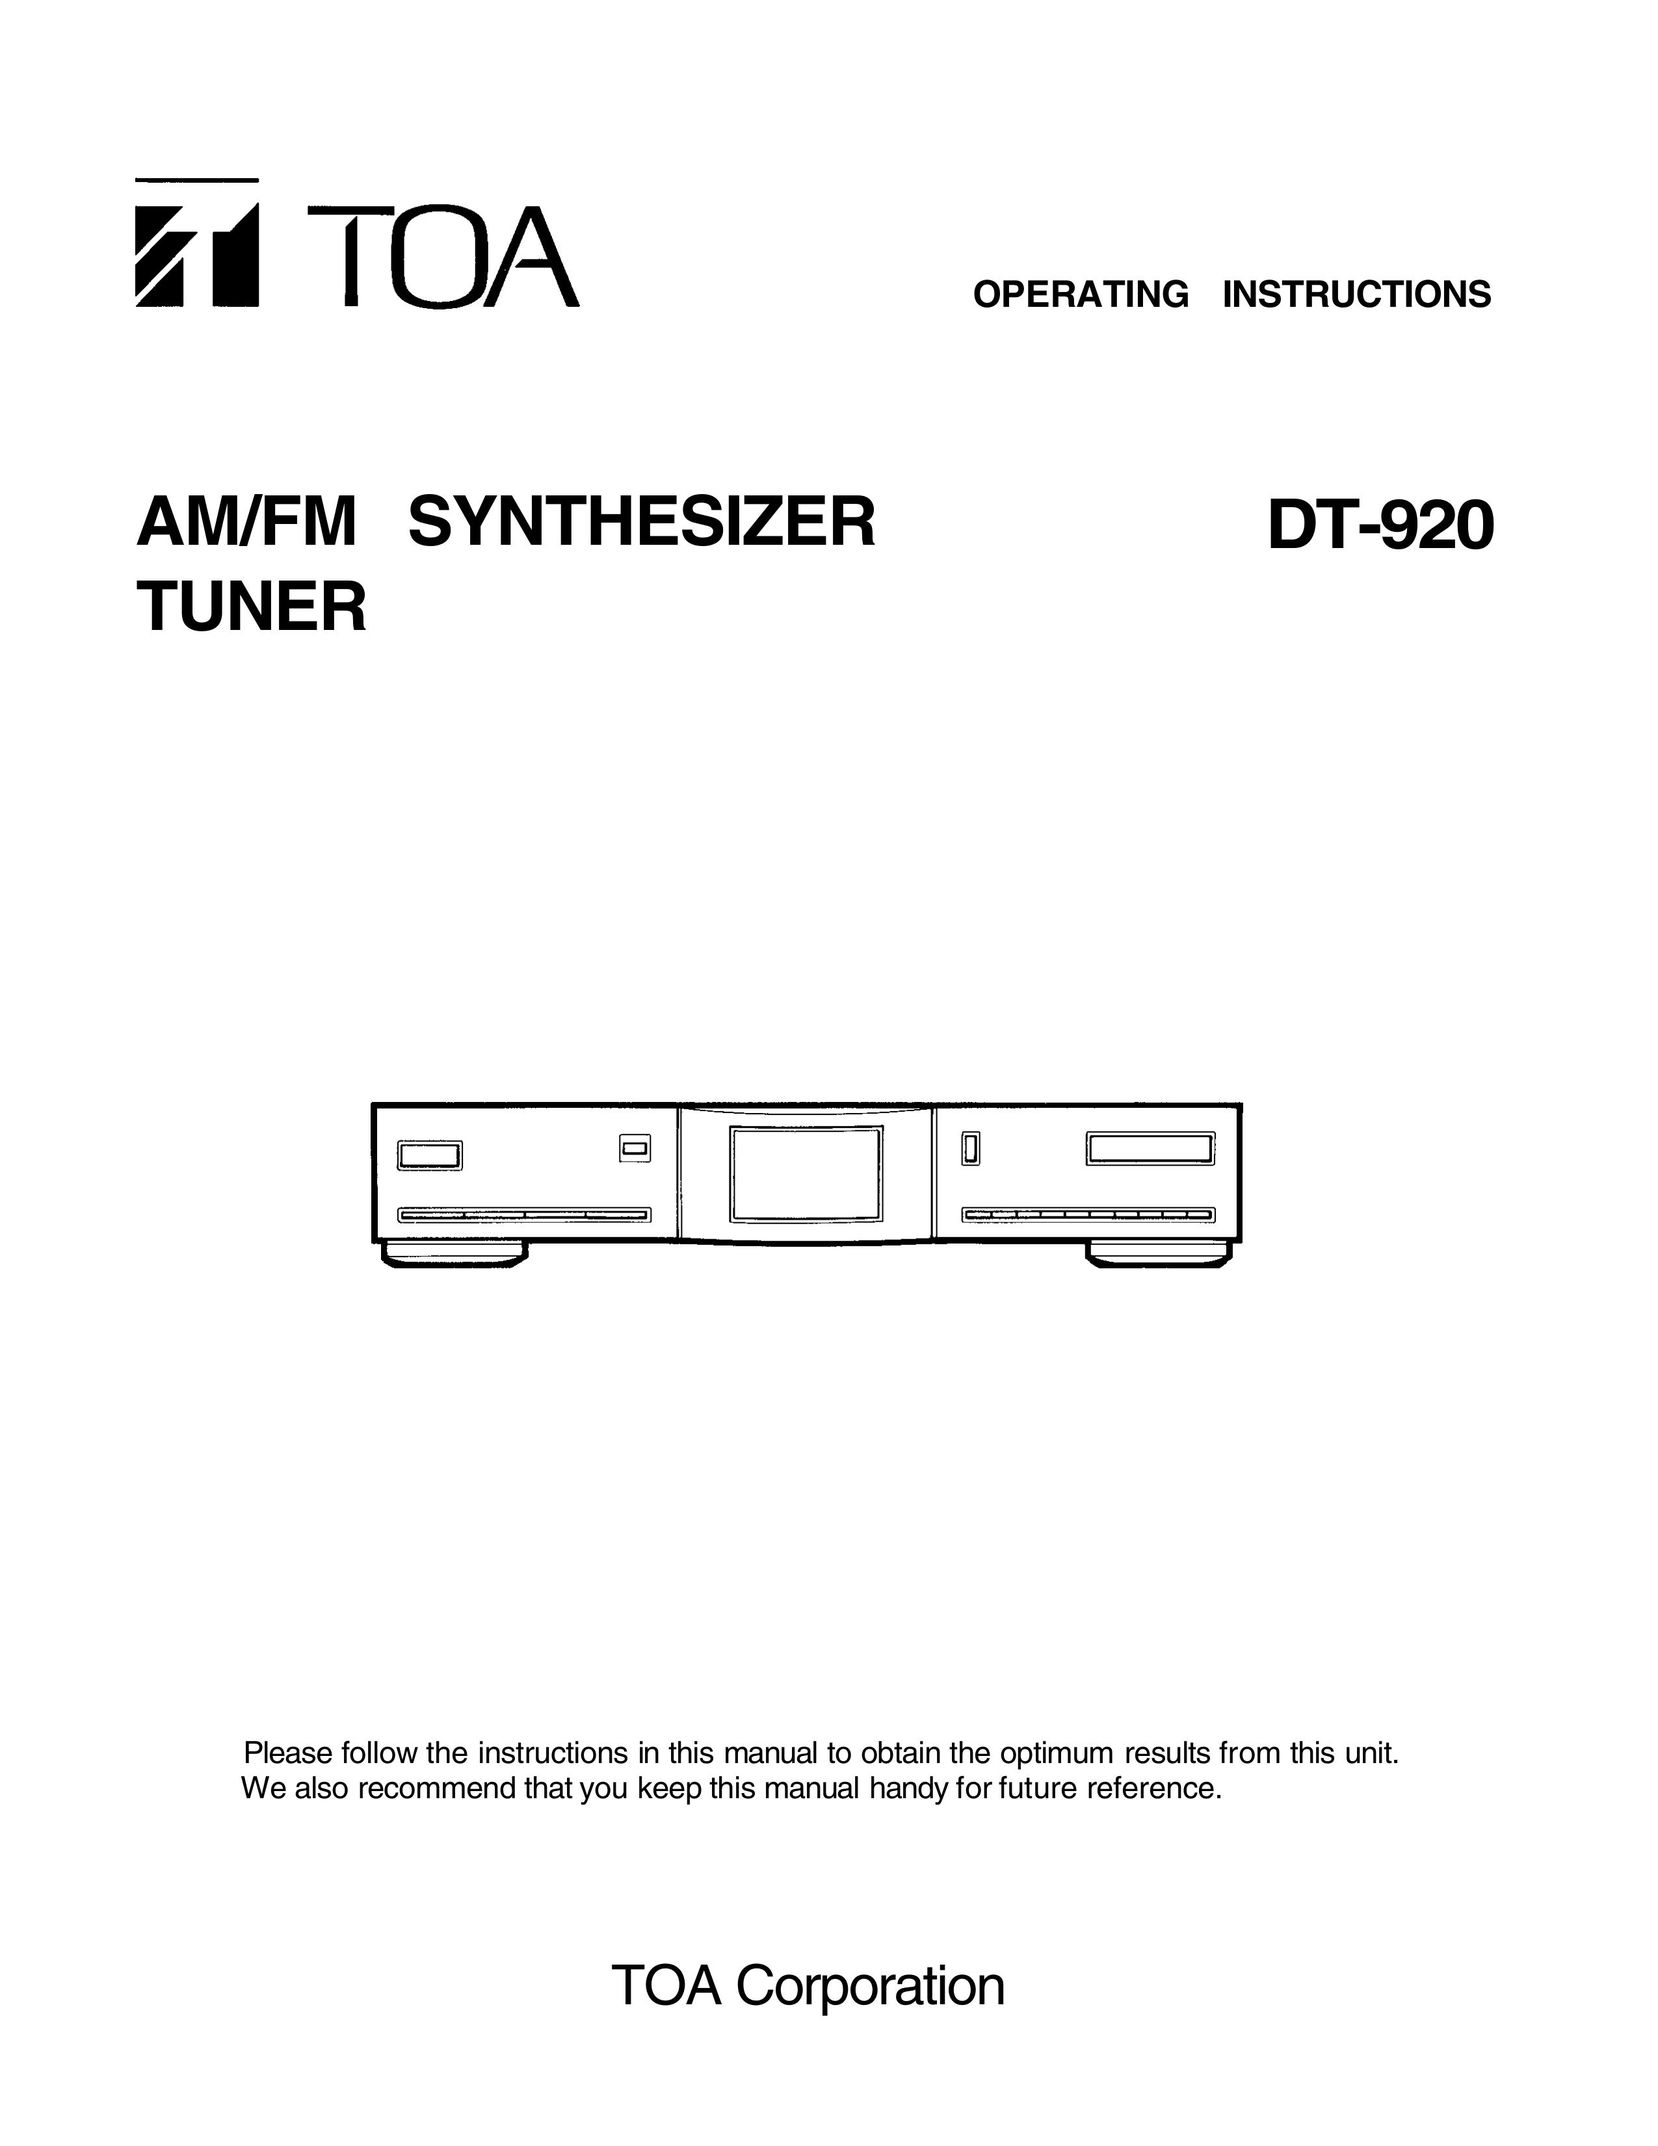 Unwind DT-920 Stereo System User Manual